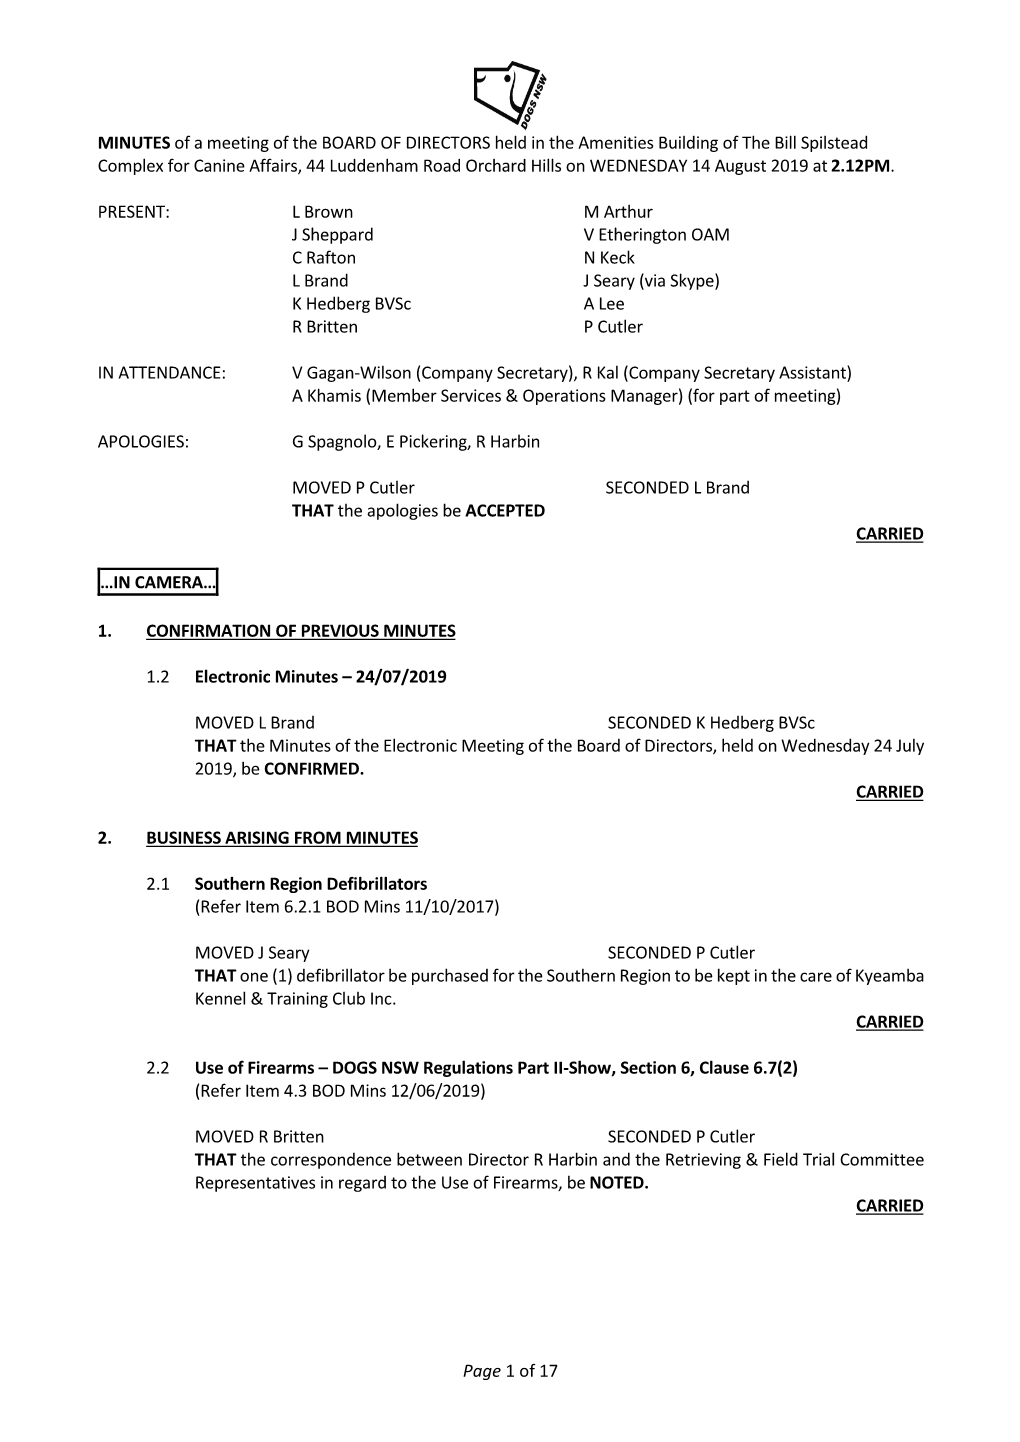 Page 1 of 17 Minutes of a Meeting of the Board of Directors Held Wednesday 14 August 2019